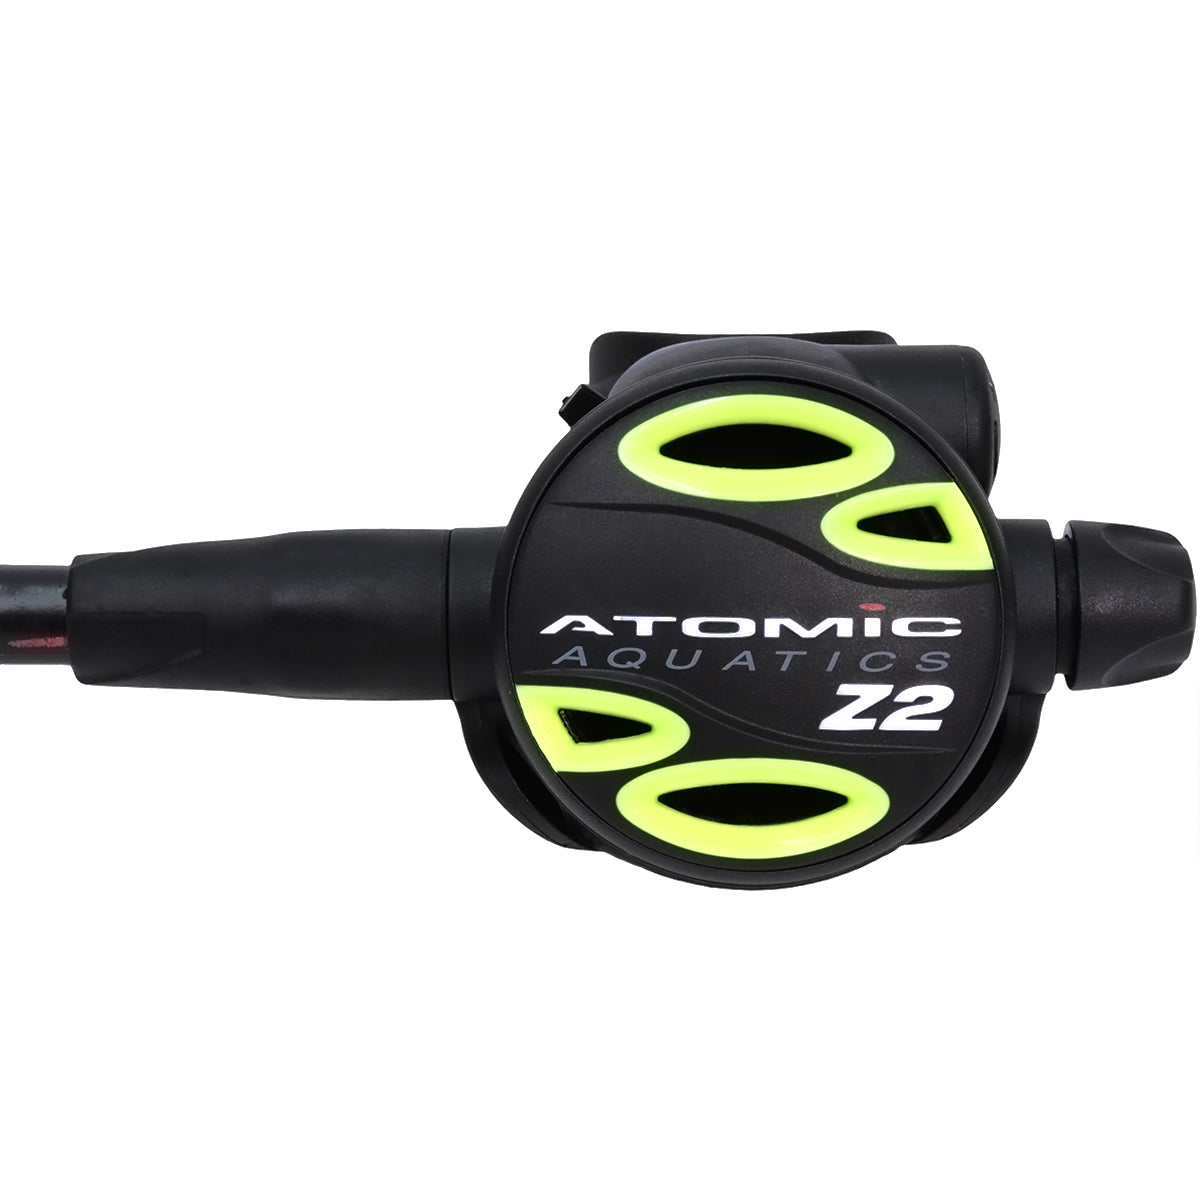 Atomic Aquatics B2 Regulator, DIN with Color Kit and Z2 Octo Scuba Diving Package